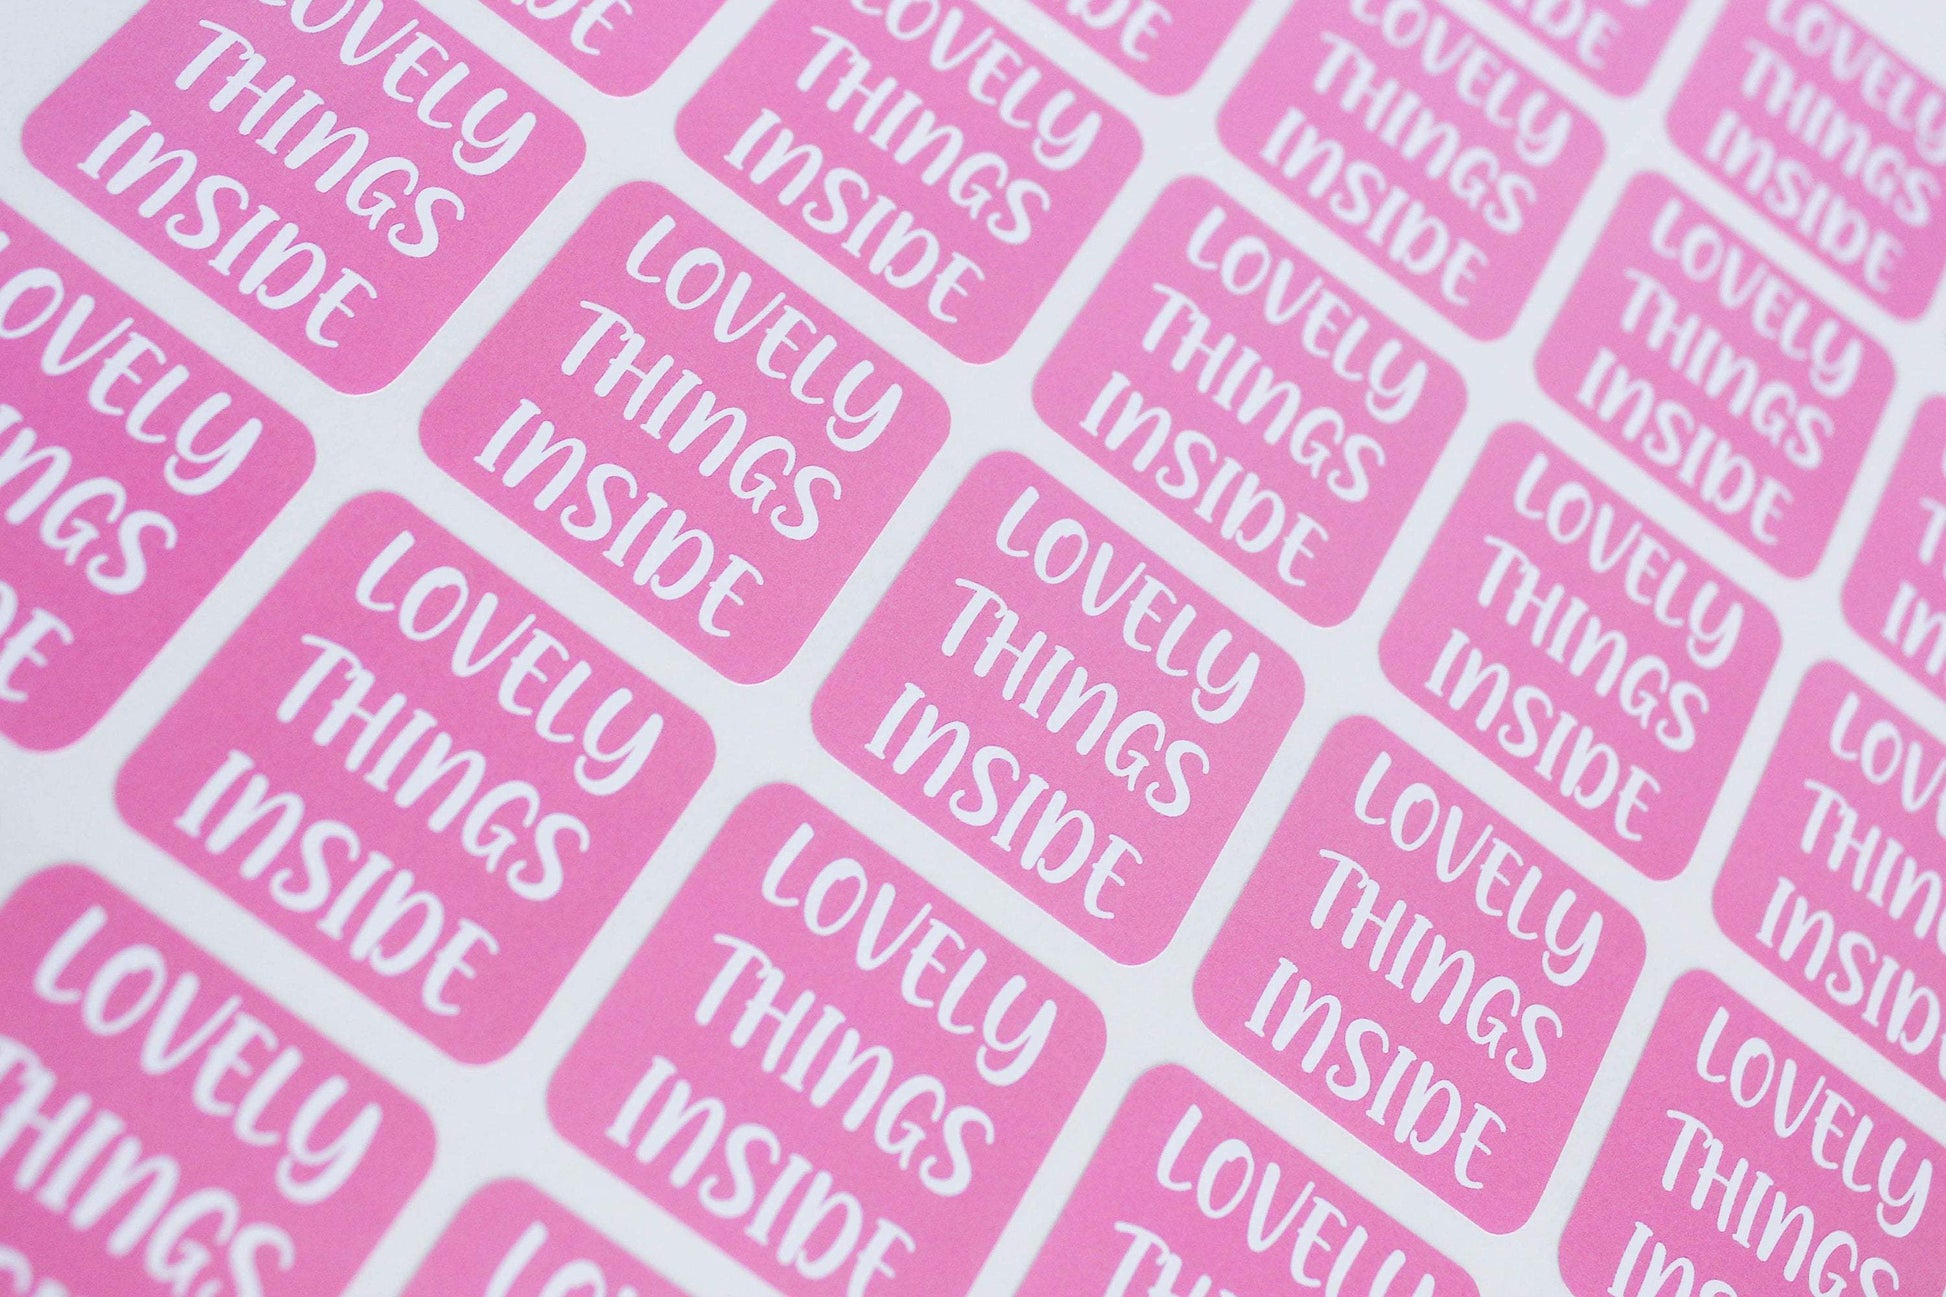 E&L Designs Lovely Things Inside Order Stickers - Pack of 30